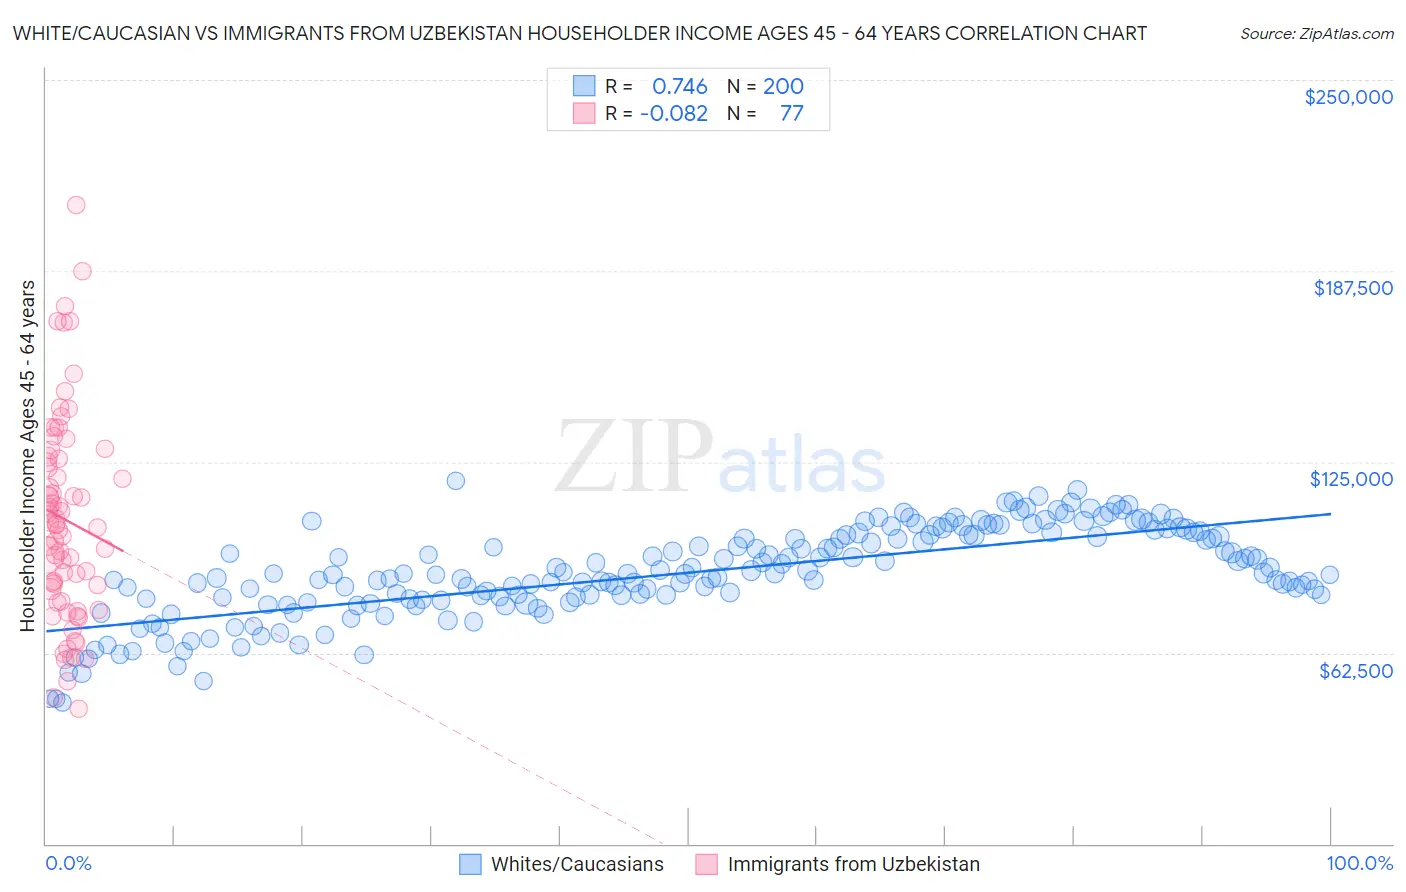 White/Caucasian vs Immigrants from Uzbekistan Householder Income Ages 45 - 64 years